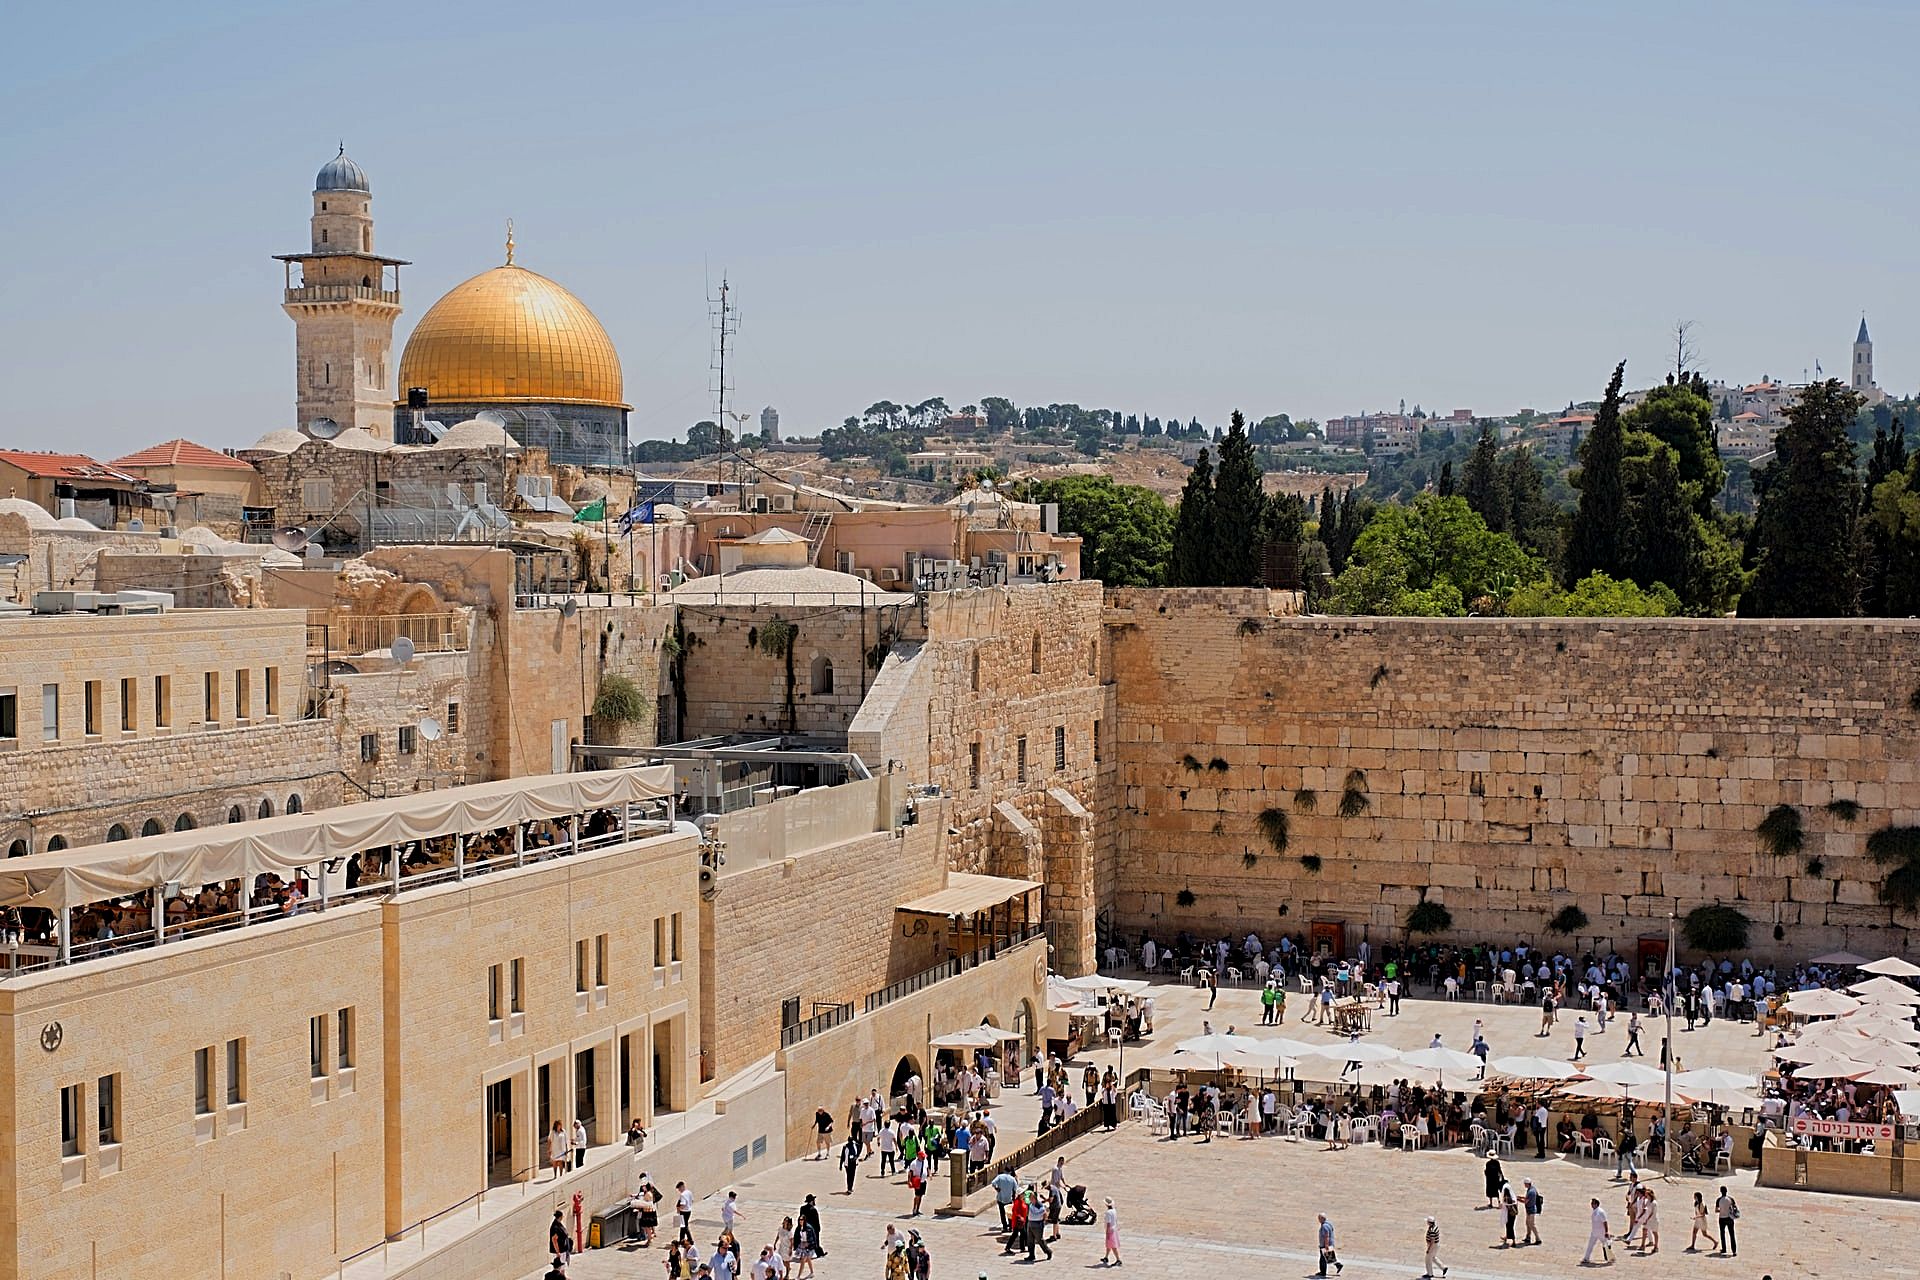 View of the Western Wall and Dome of the Rock, Jerusalem